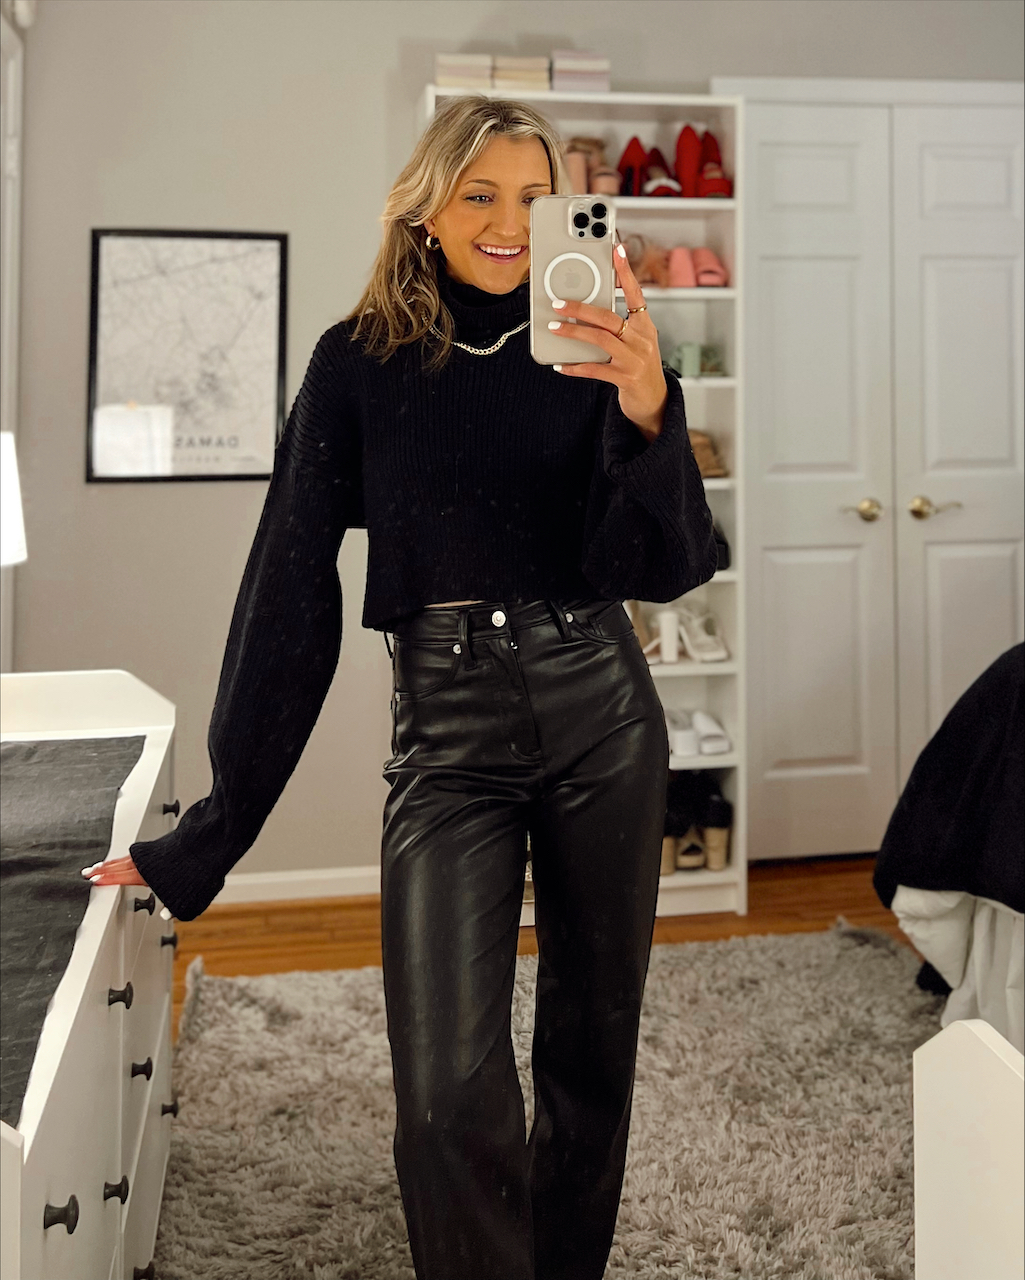 Black Leather Leggings with Socks Outfits (2 ideas & outfits